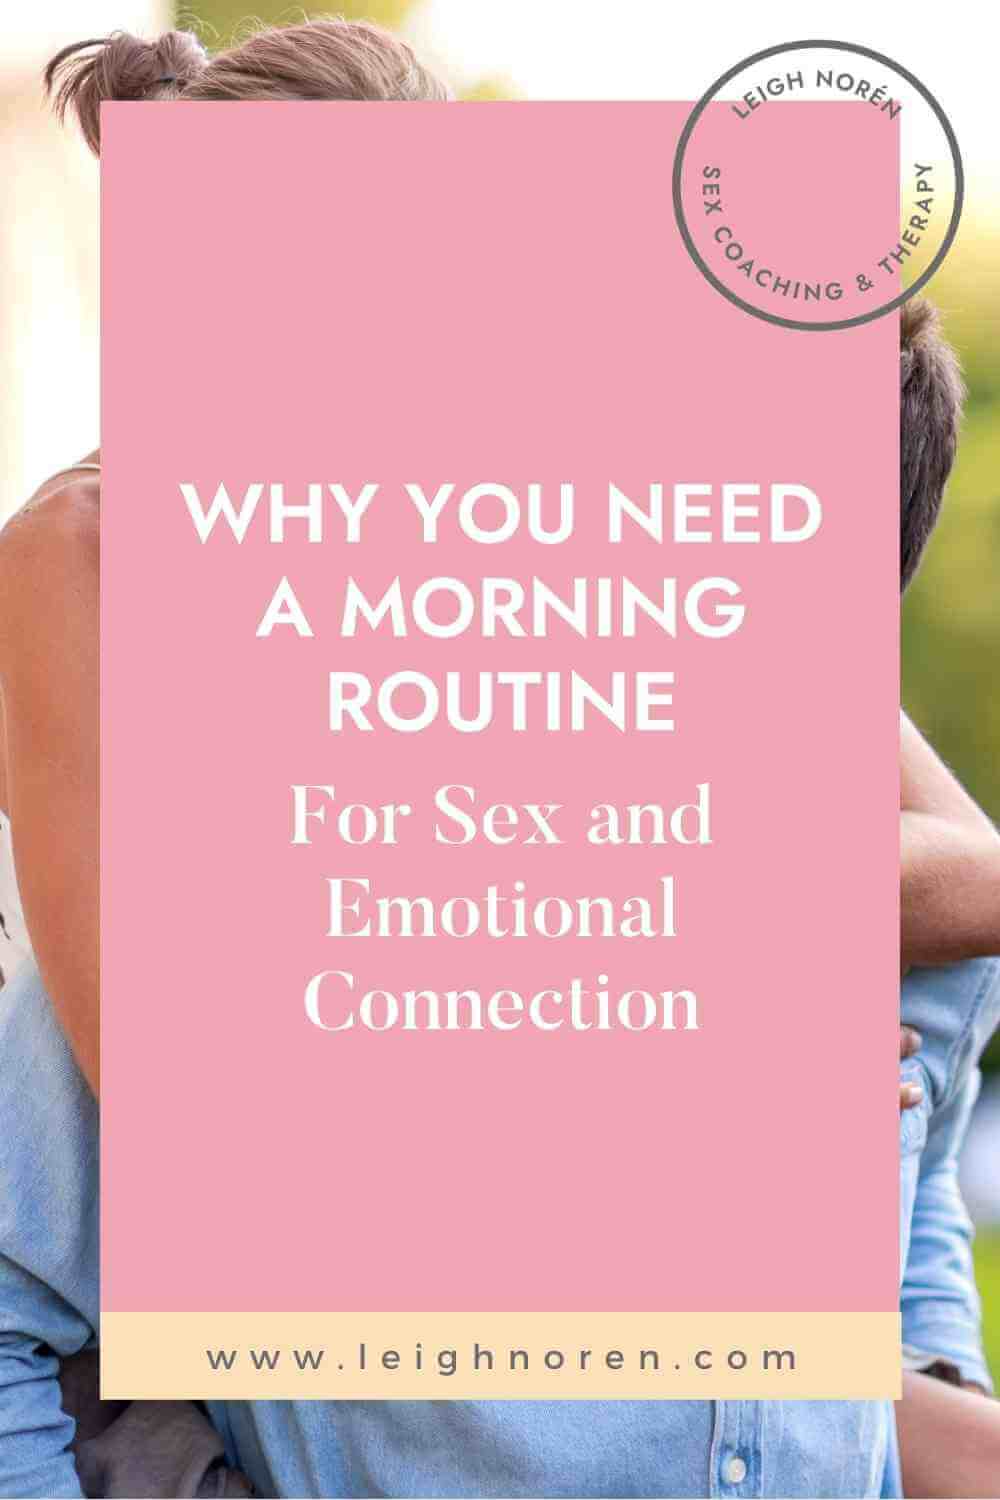 Why you need a morning routine for sex and emotional connection